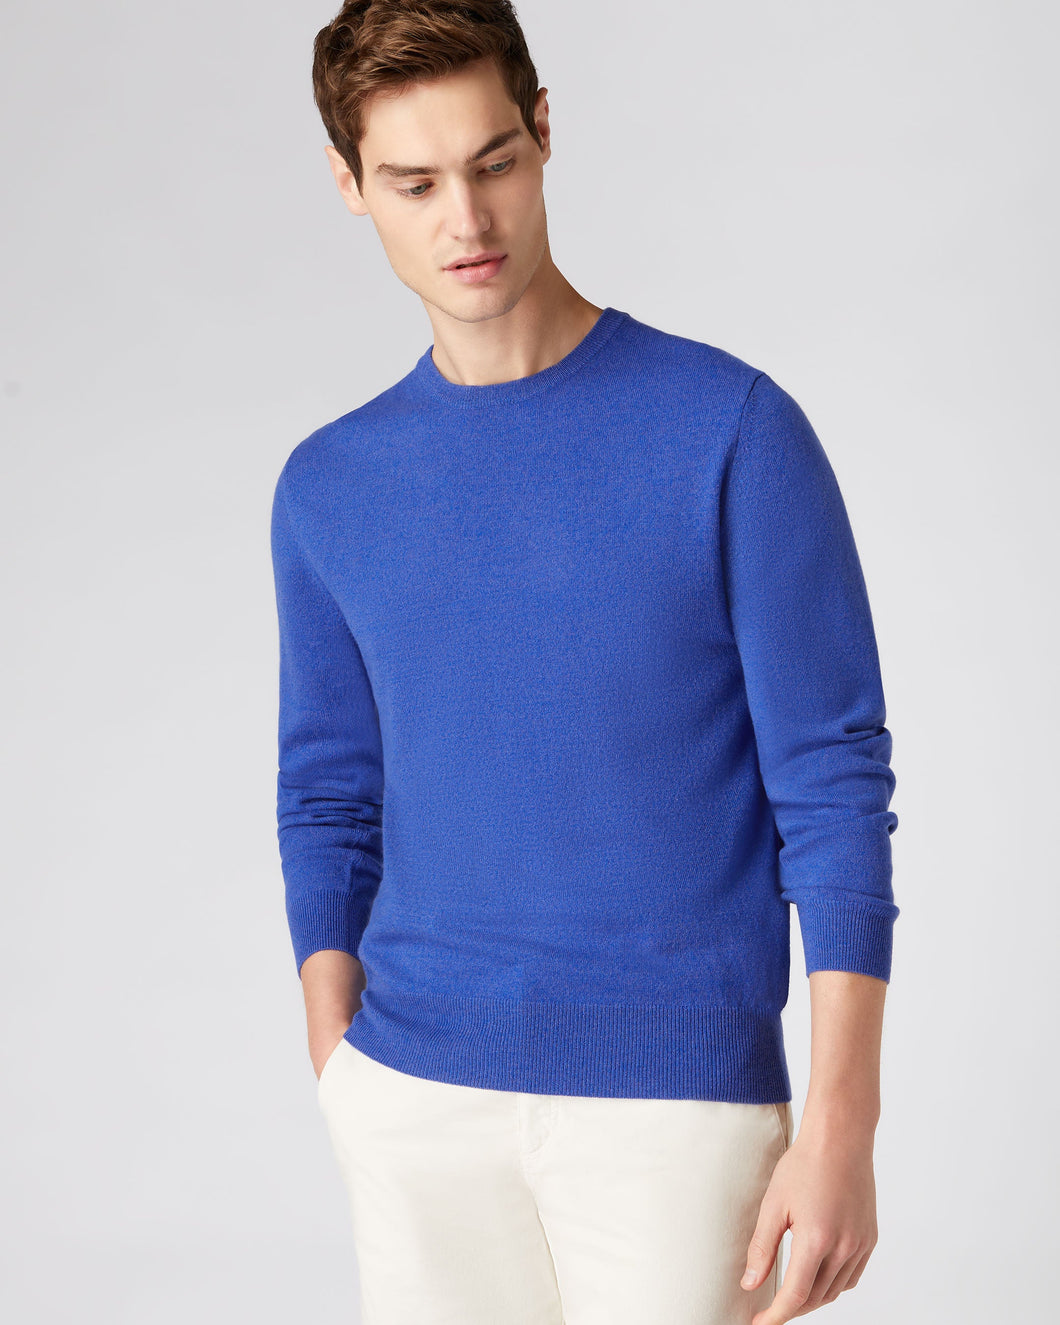 N.Peal Men's The Oxford Round Neck Cashmere Jumper Nile Blue